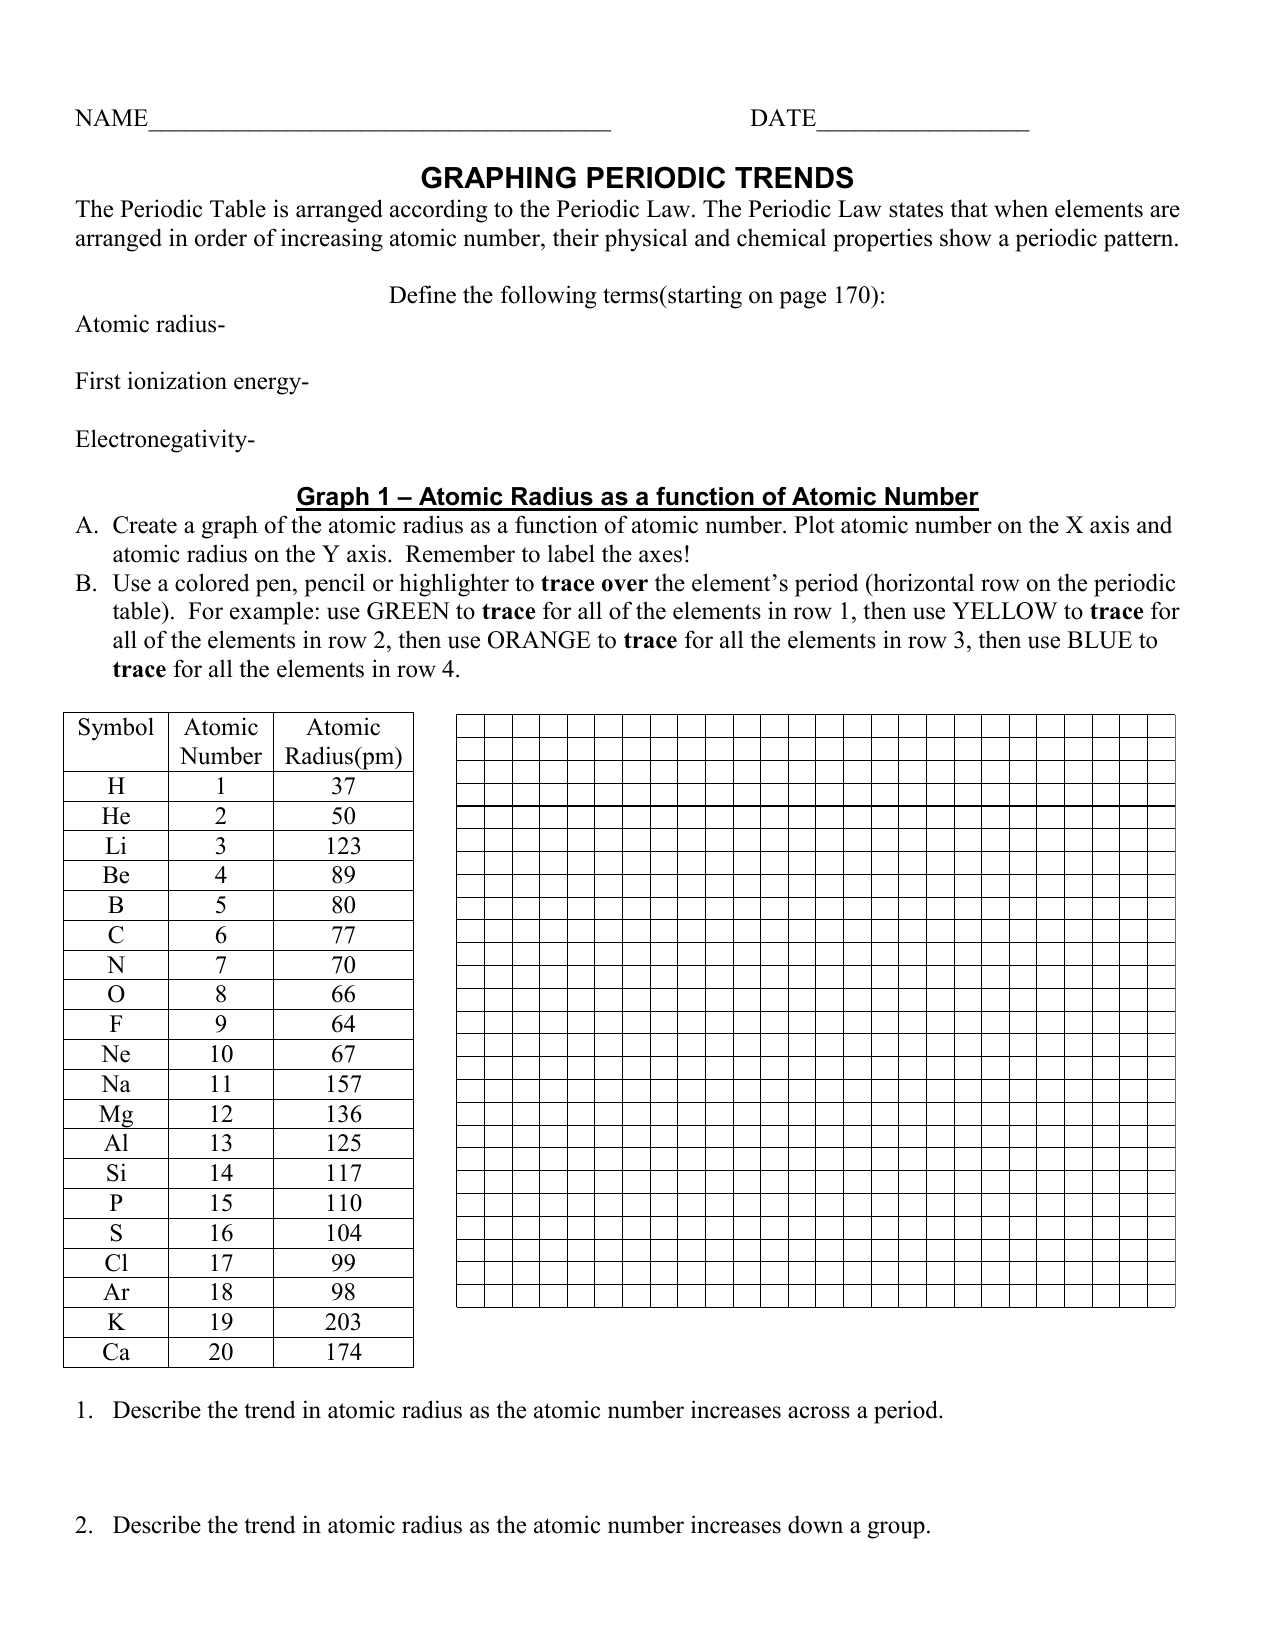 Graphing-periodic-trends With Periodic Trends Worksheet Answers